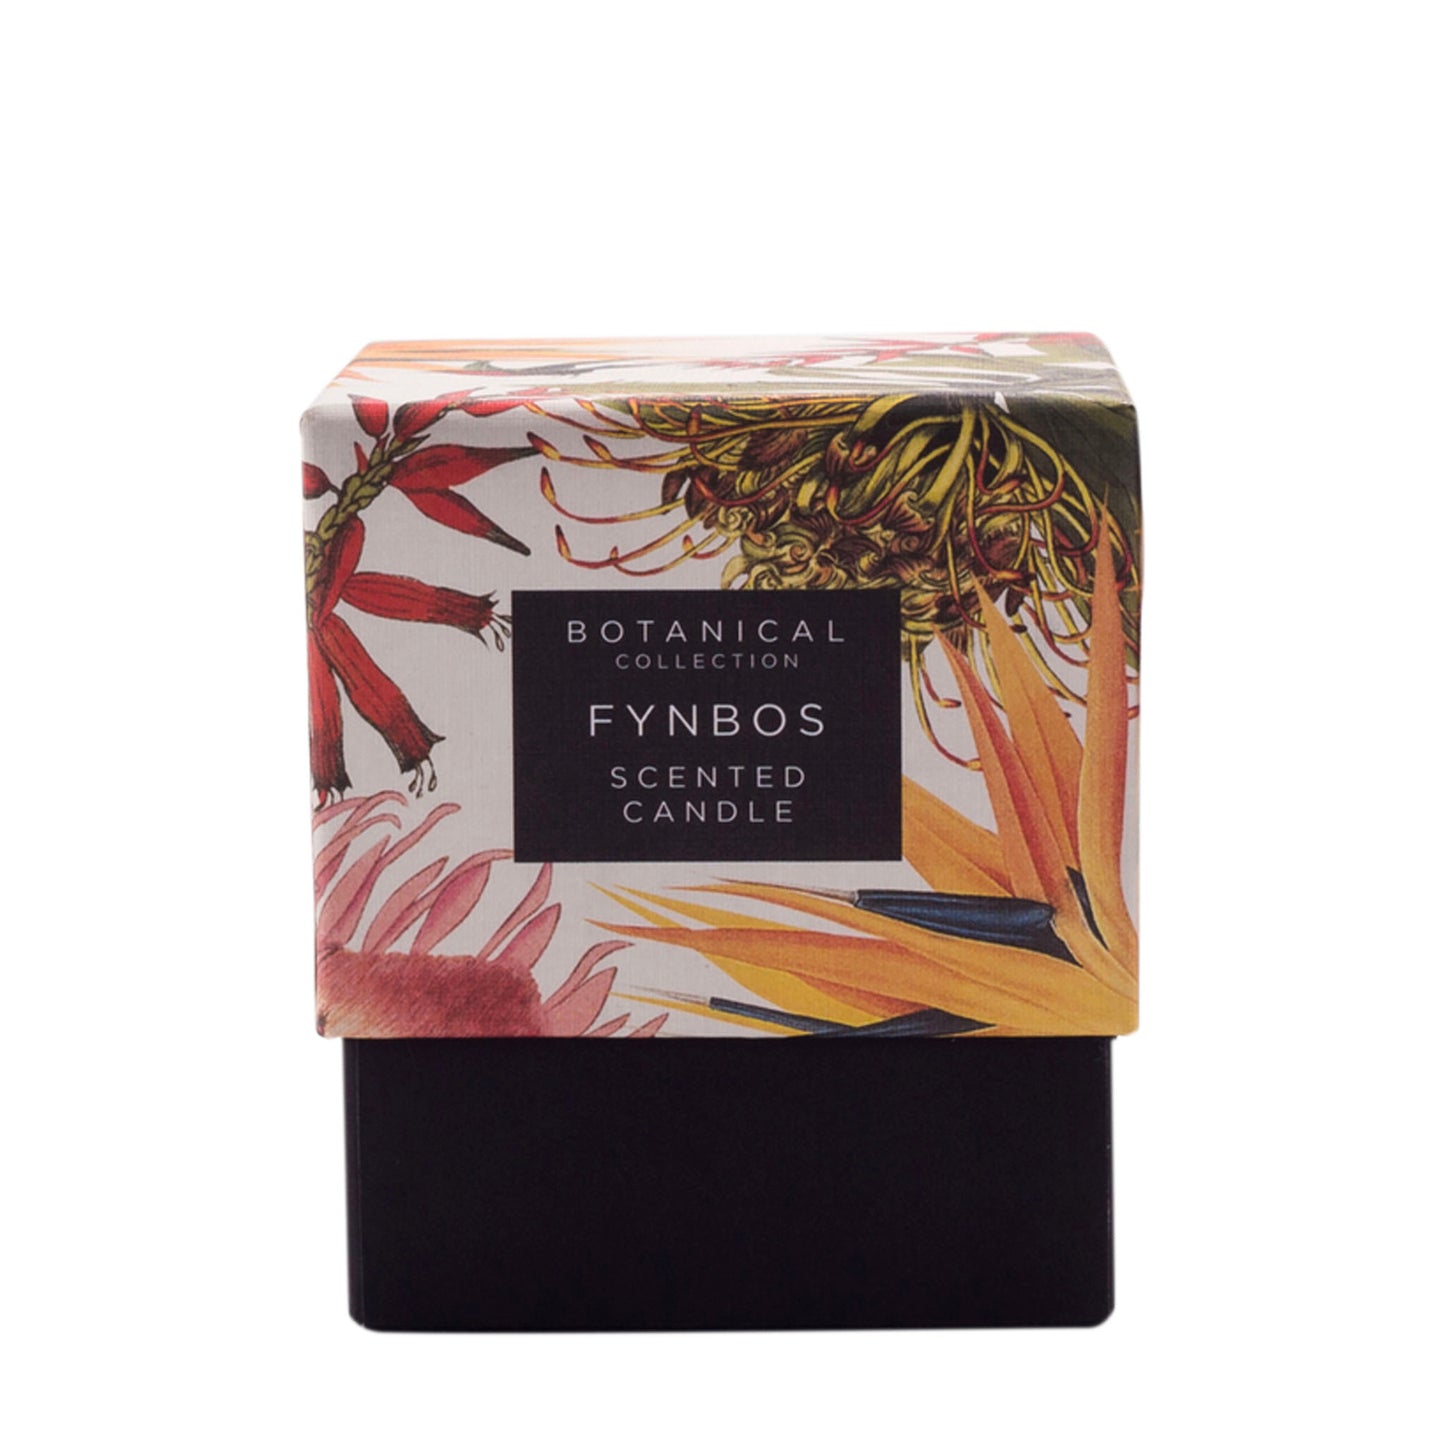 Fynbos Scented Candle